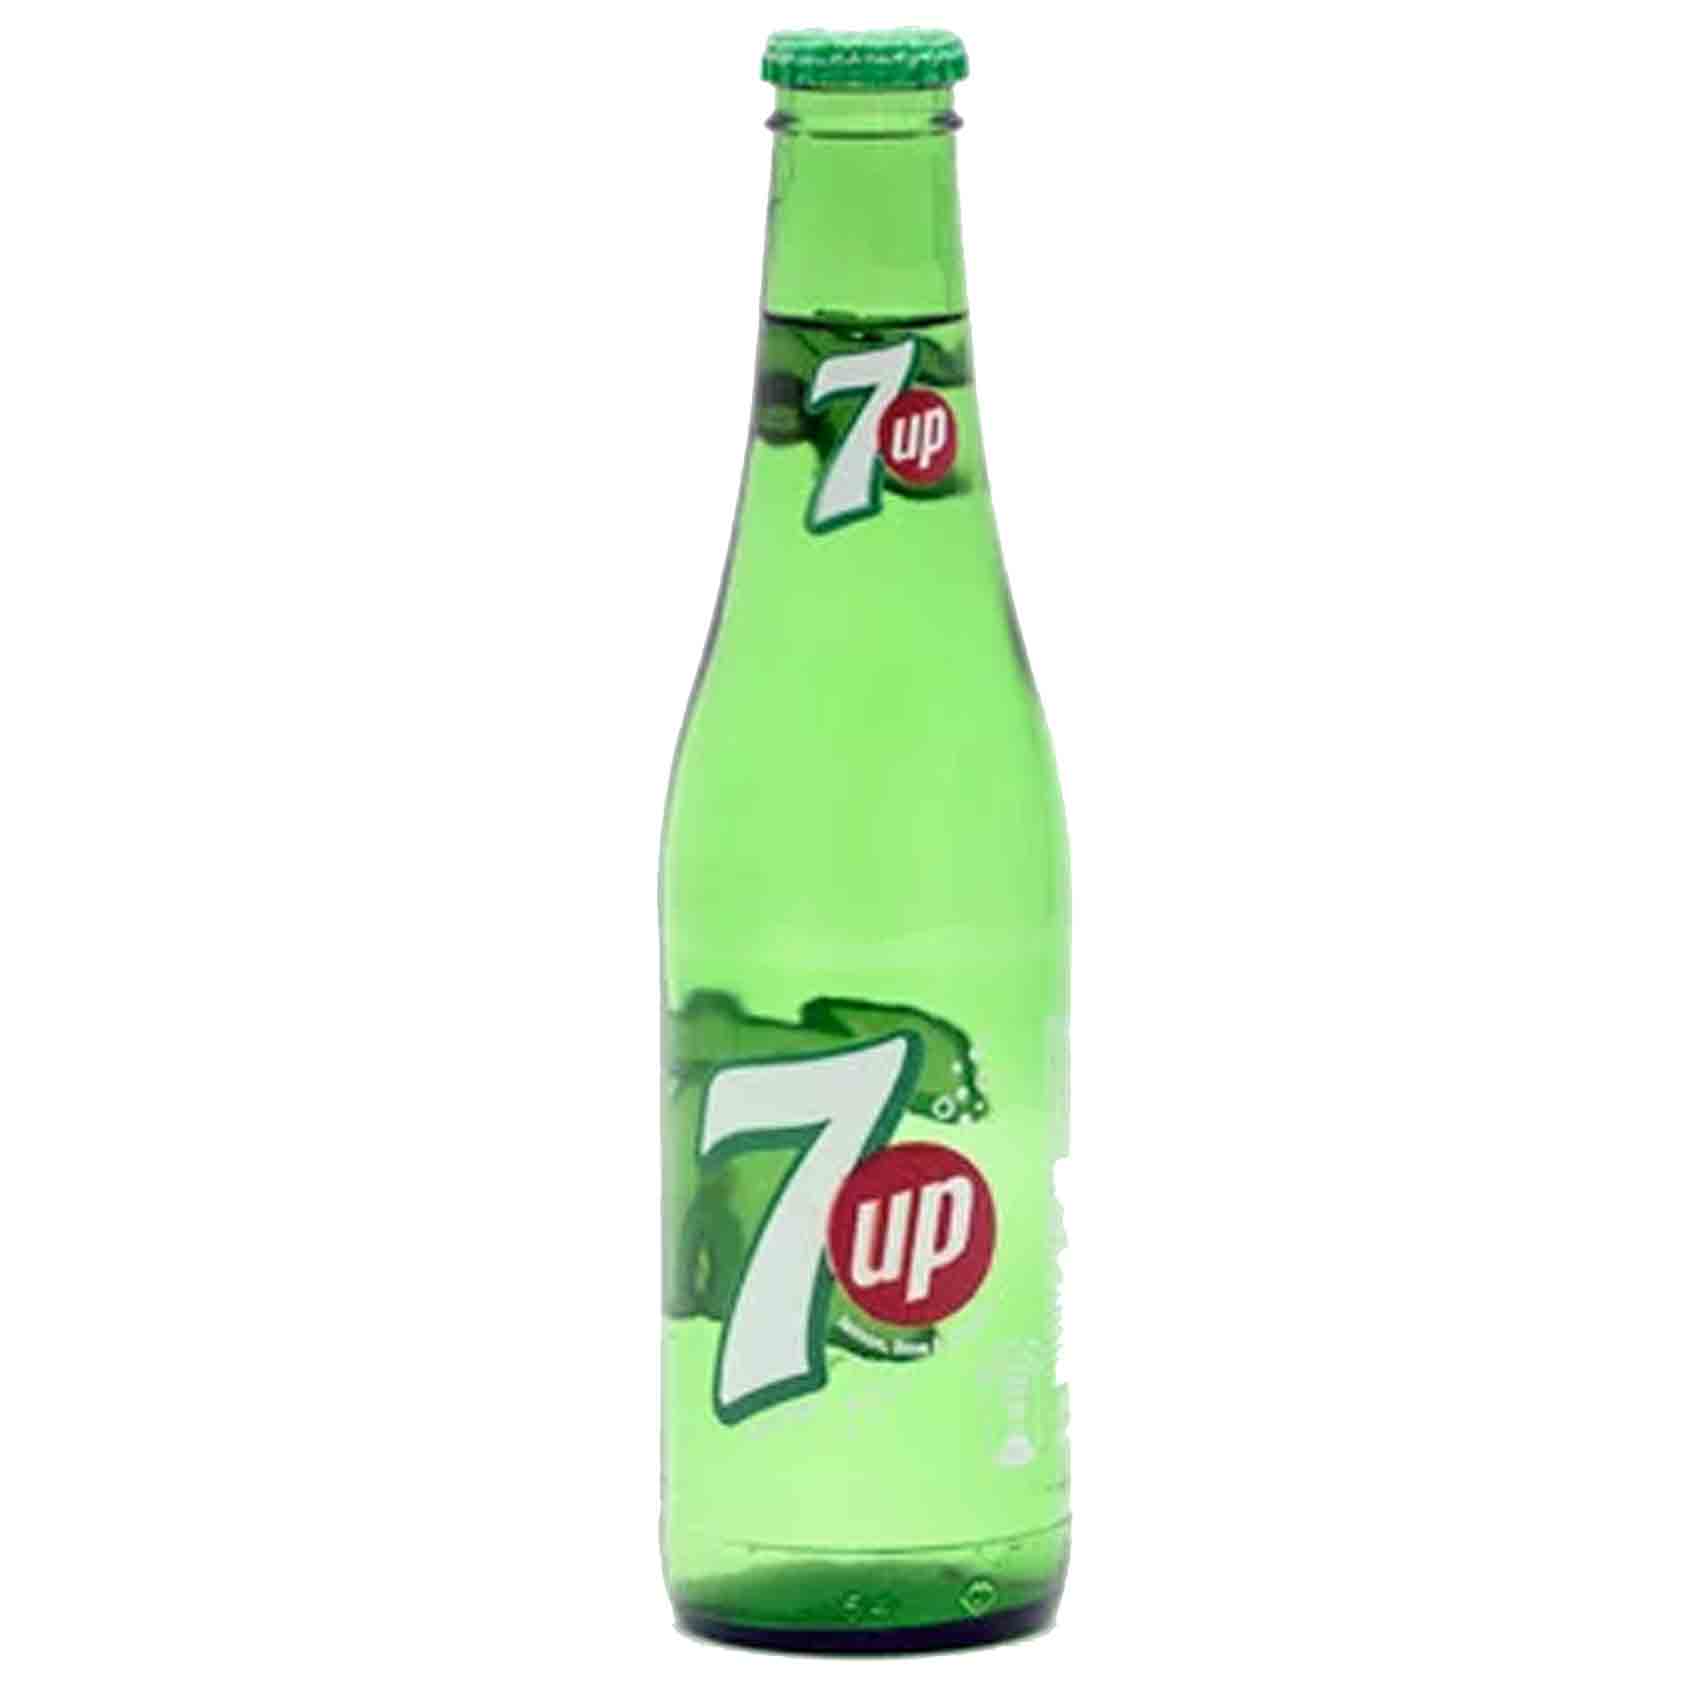 7Up Drink Glass 250 Ml